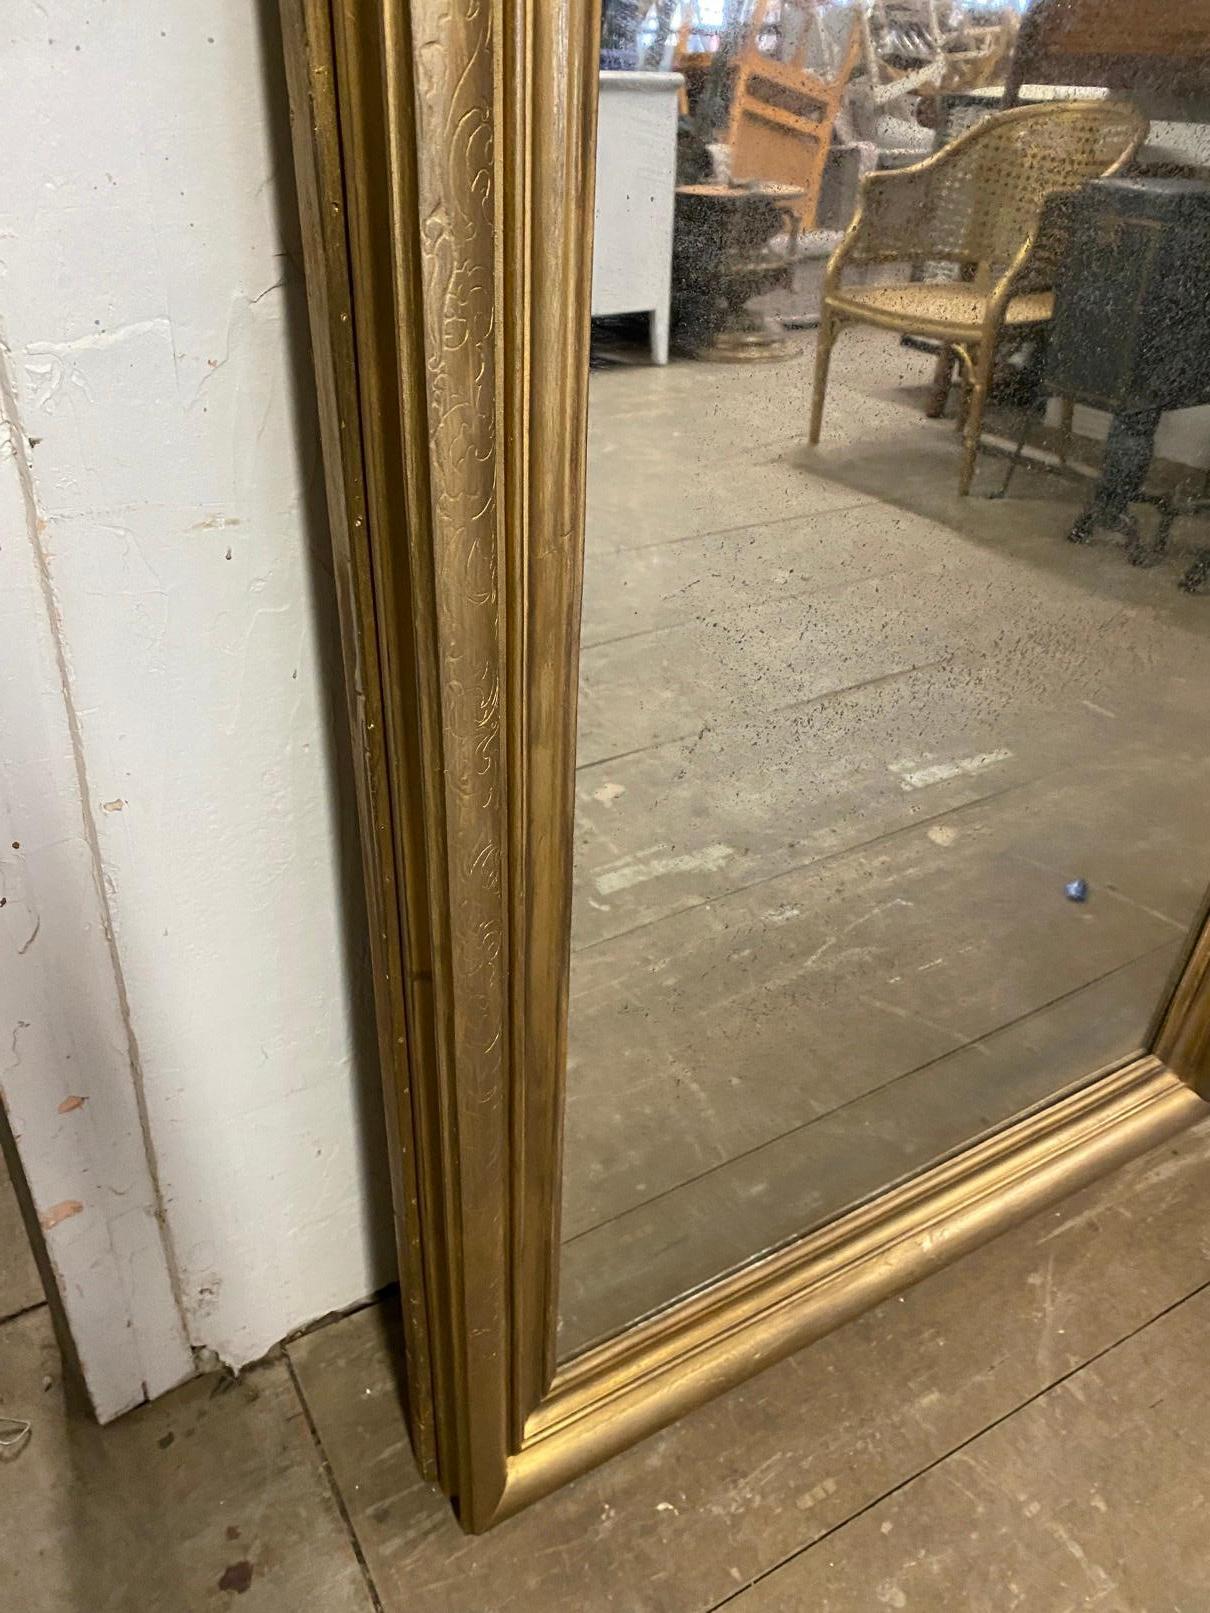 Large gold gilt classical mirror can be hung in either direction. Mirror is suited for pier, console, mantle or fireplace. The simple elegant style lends itself to fit into most decor.
The mirror has been refinished and some of the original detail